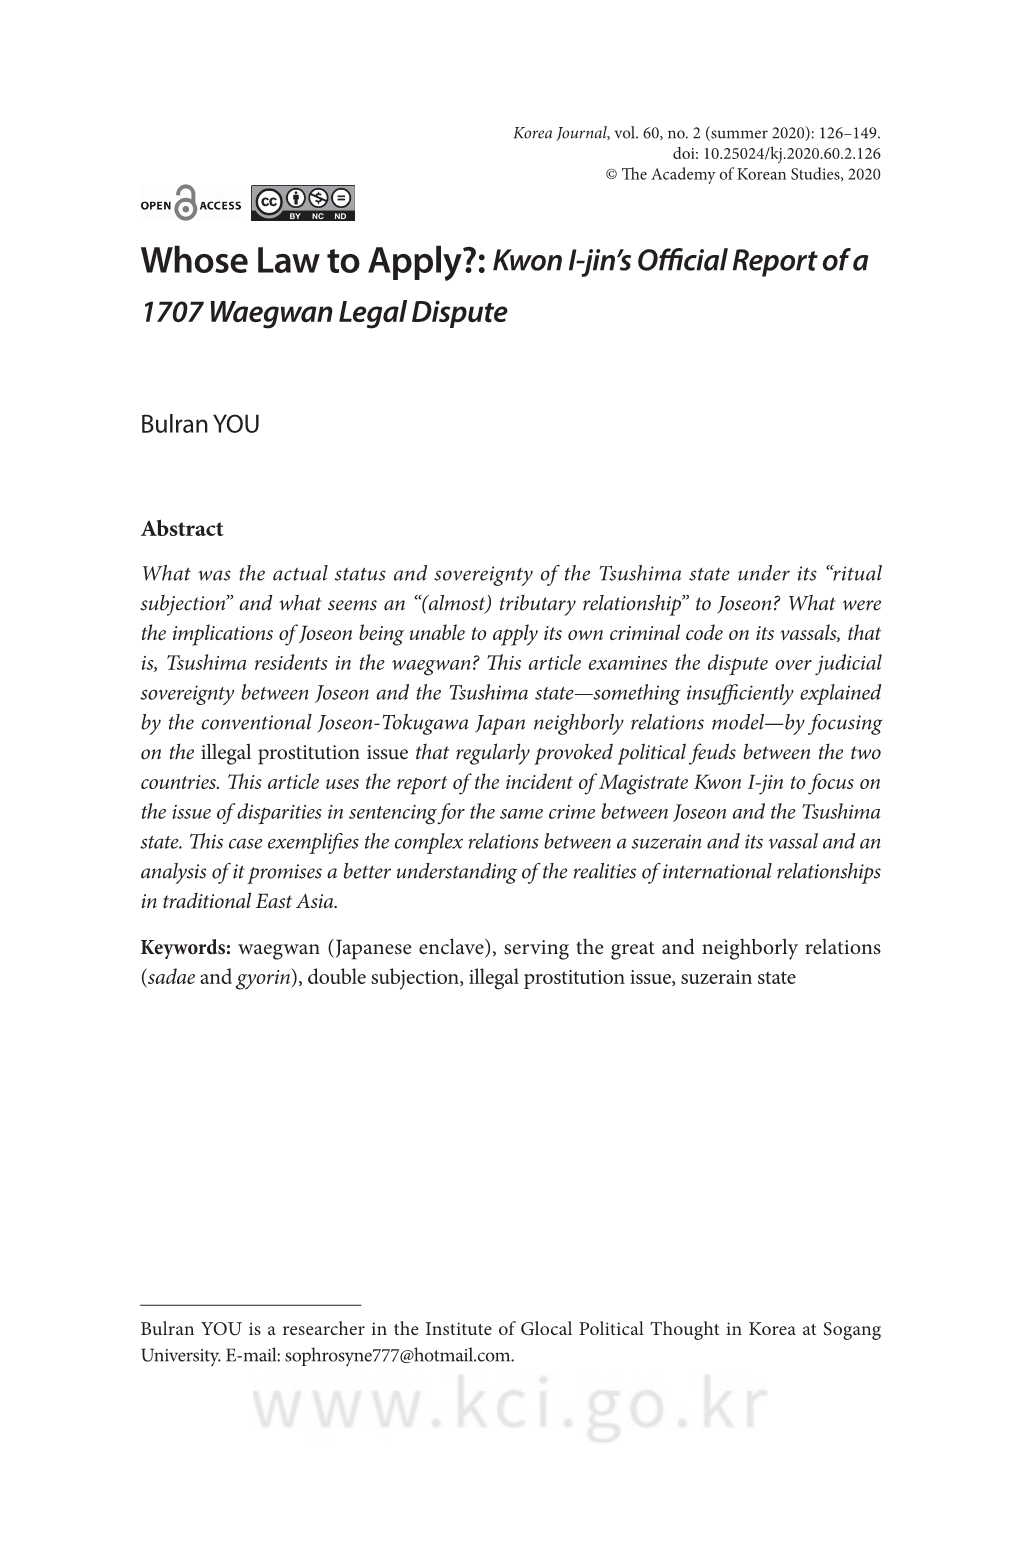 Whose Law to Apply?: Kwon I-Jin's Official Report of a 1707 Waegwan Legal Dispute